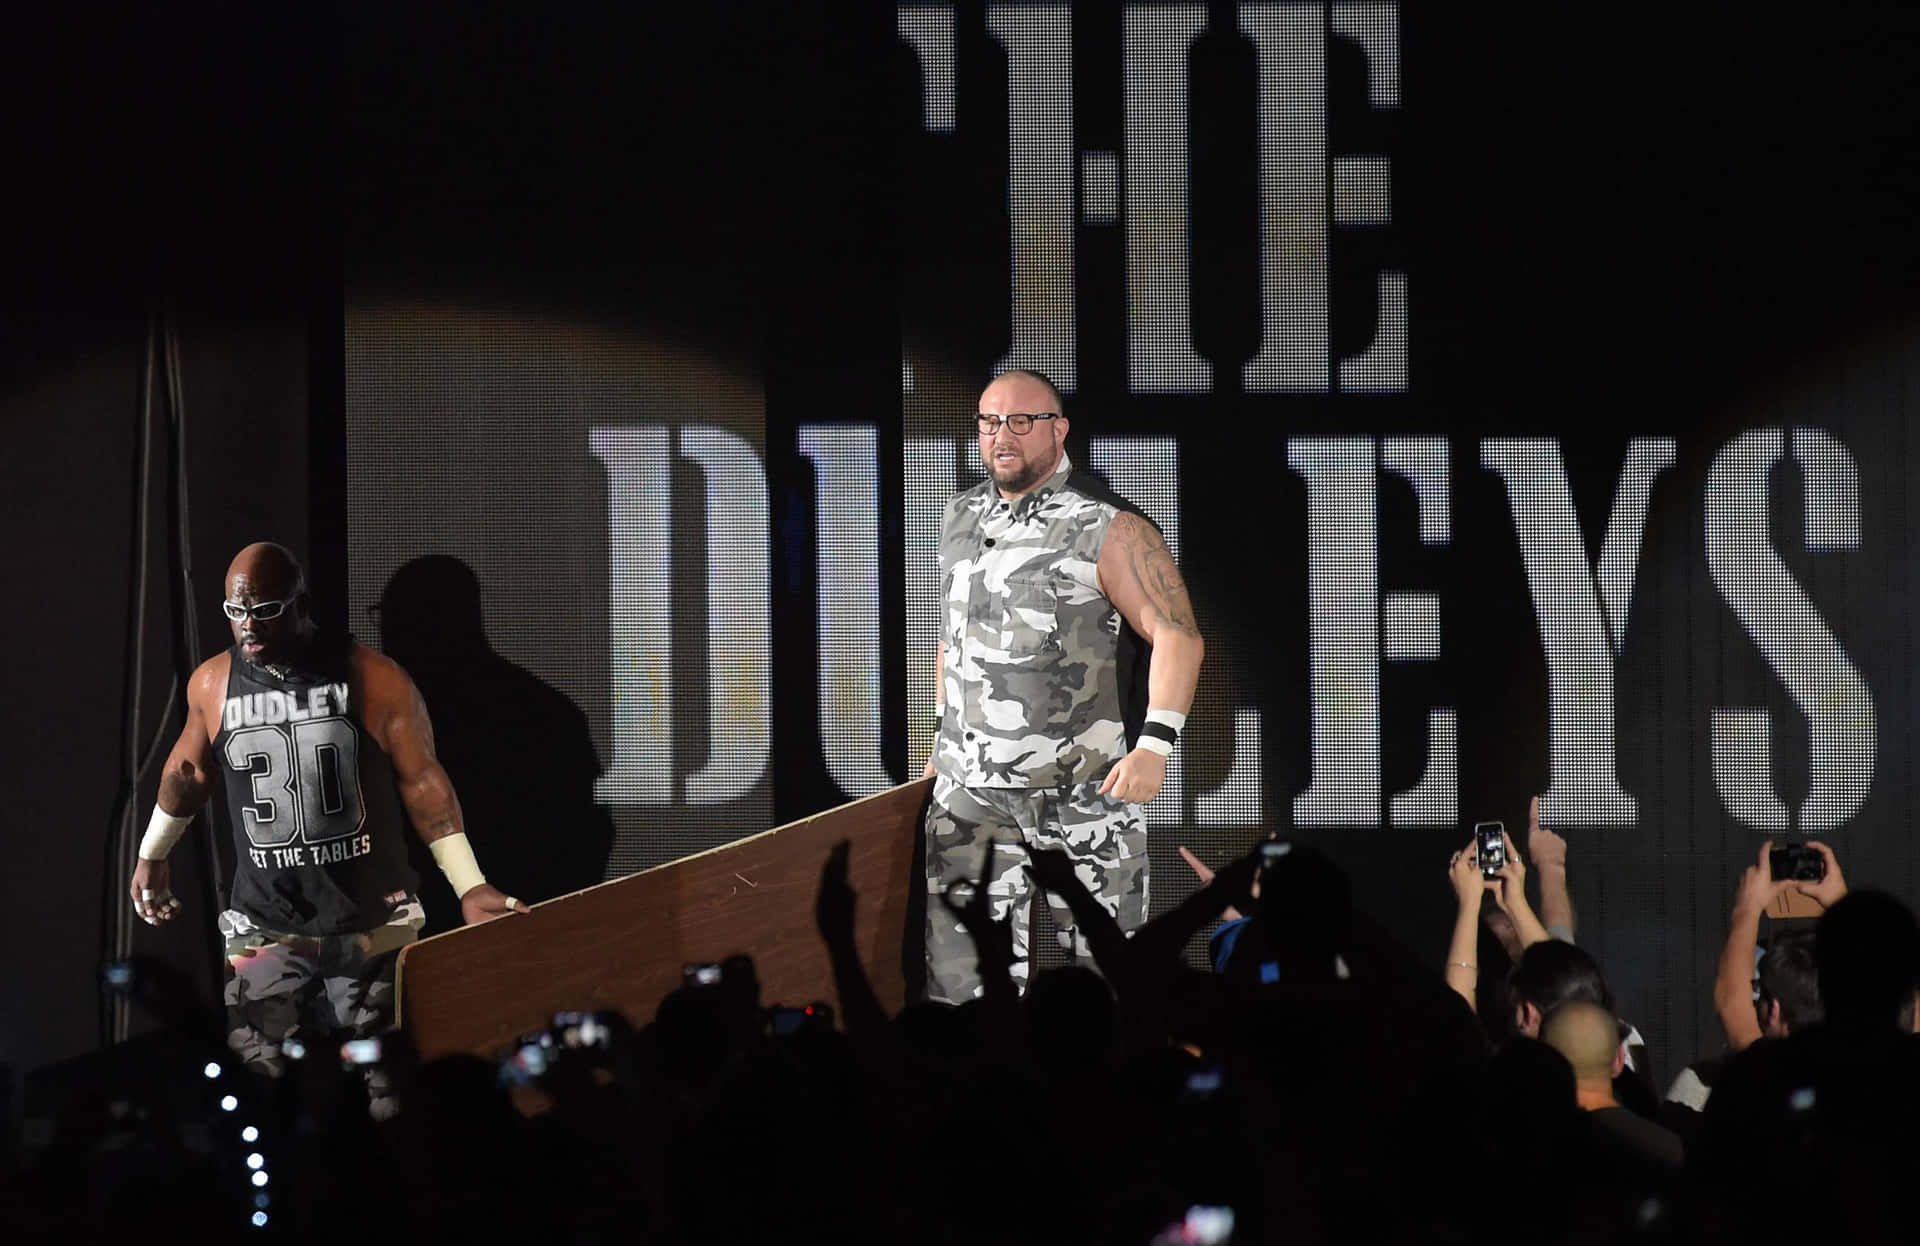 Bubba Ray Dudley The Dudleys Wallpaper